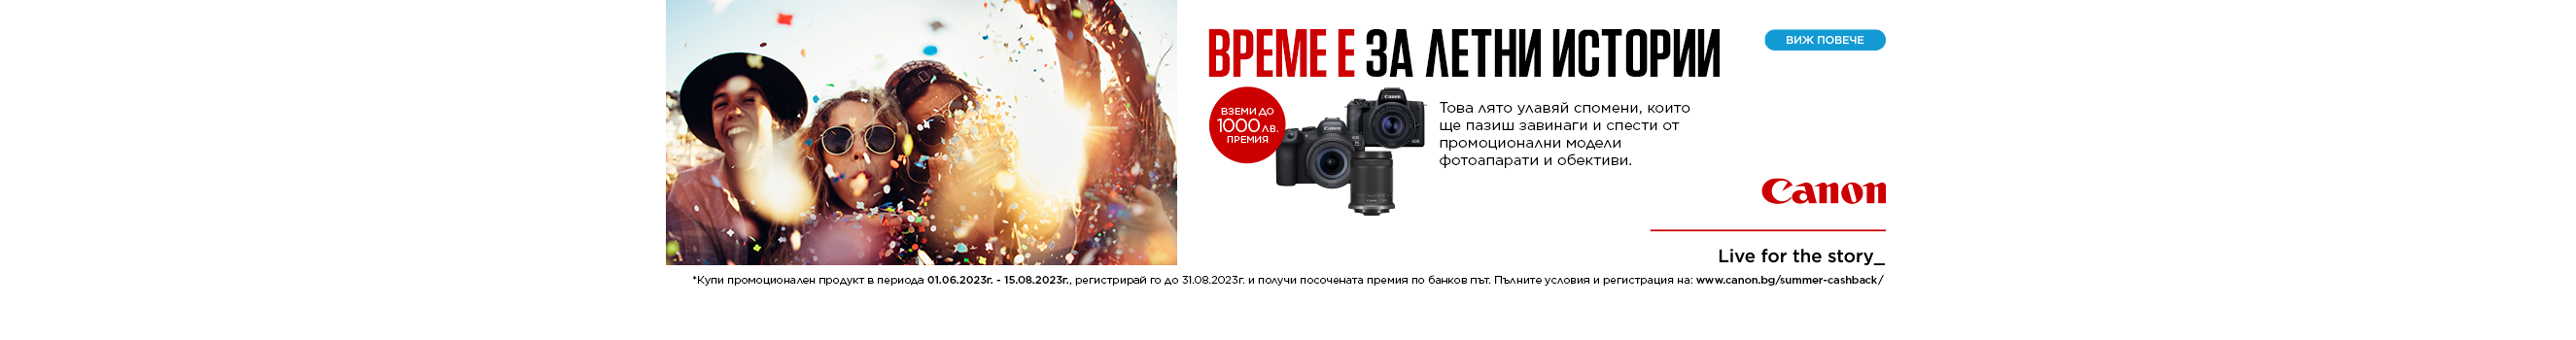  Get up to BGN 1000 Discount for Canon cameras and lenses at PhotoSynthesis store.